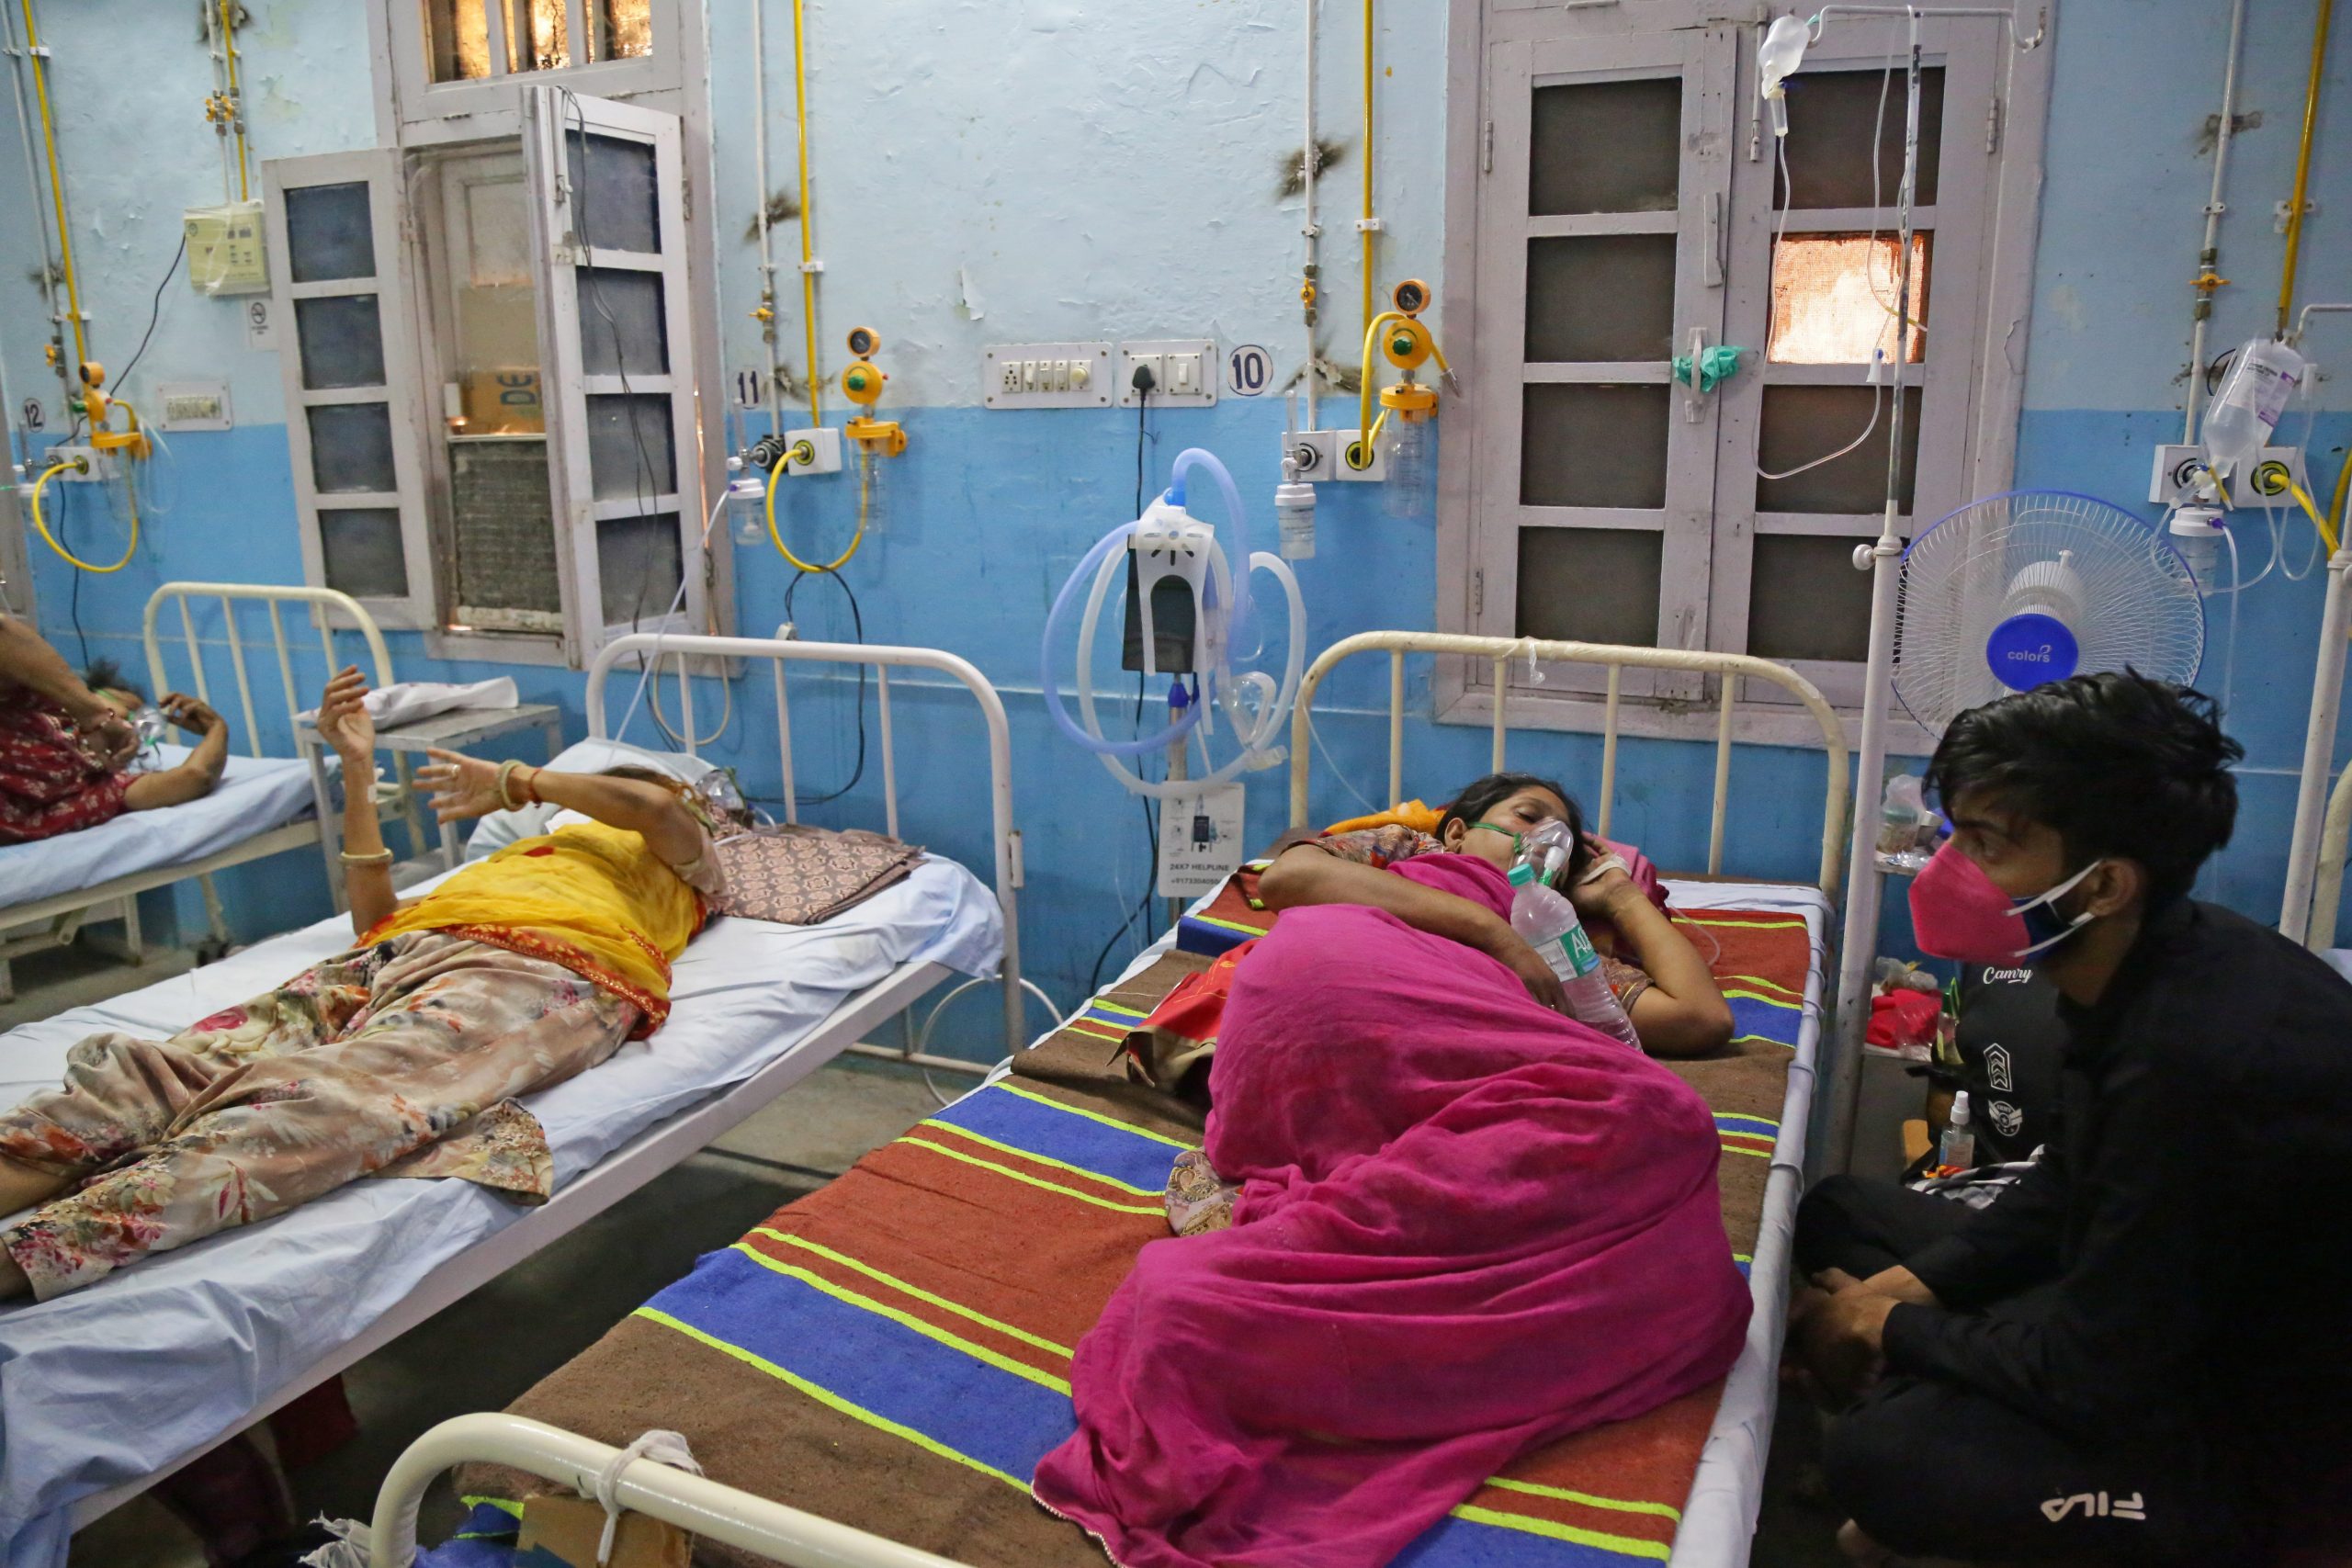 COVID patients receives treatment in Corona ward at Government Hospital, amid shortage of oxygen and beds due to surge in covid cases in Beawar. Photo by Sumit Saraswat/ Shutterstock.com.